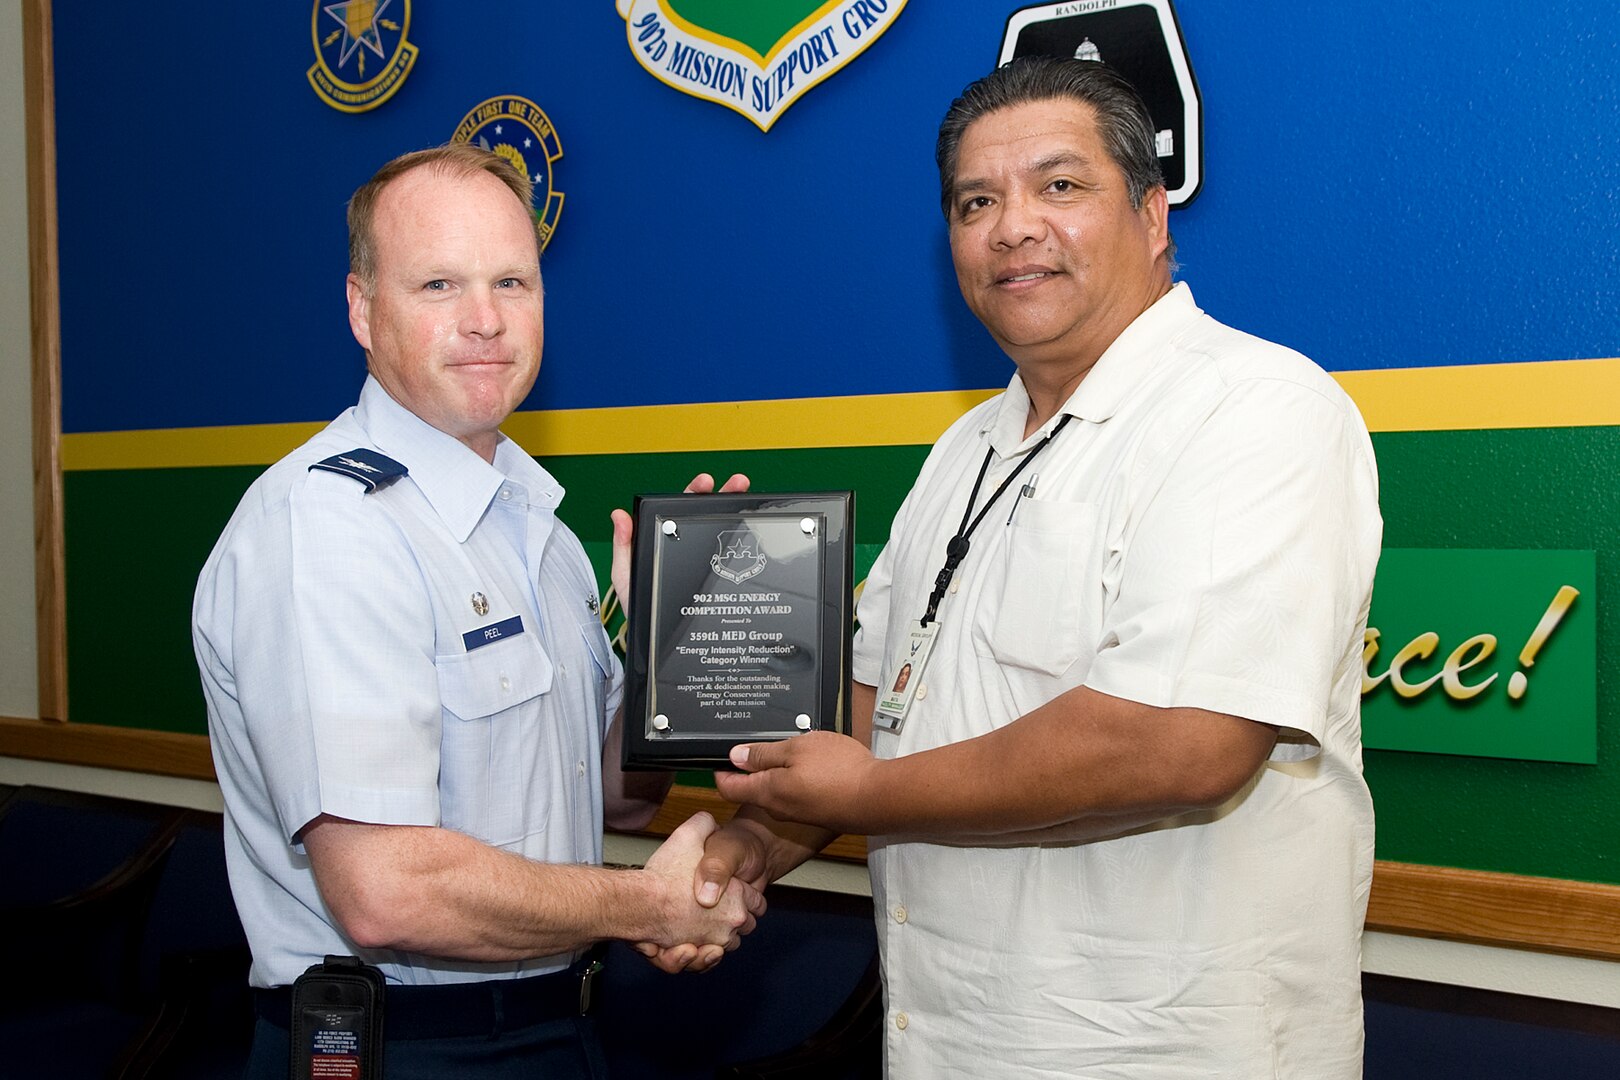 Carlos Mata, 359th Medical Group facility manger, receives the energy intensity reduction award from Col. Scott Peel, 902nd Mission Support Group commander, May 7 concluding a base-wide energy conservation competition at Joint Base San Antonio-Randolph, Texas . (U.S. Air Force photo by Benjamin Faske)